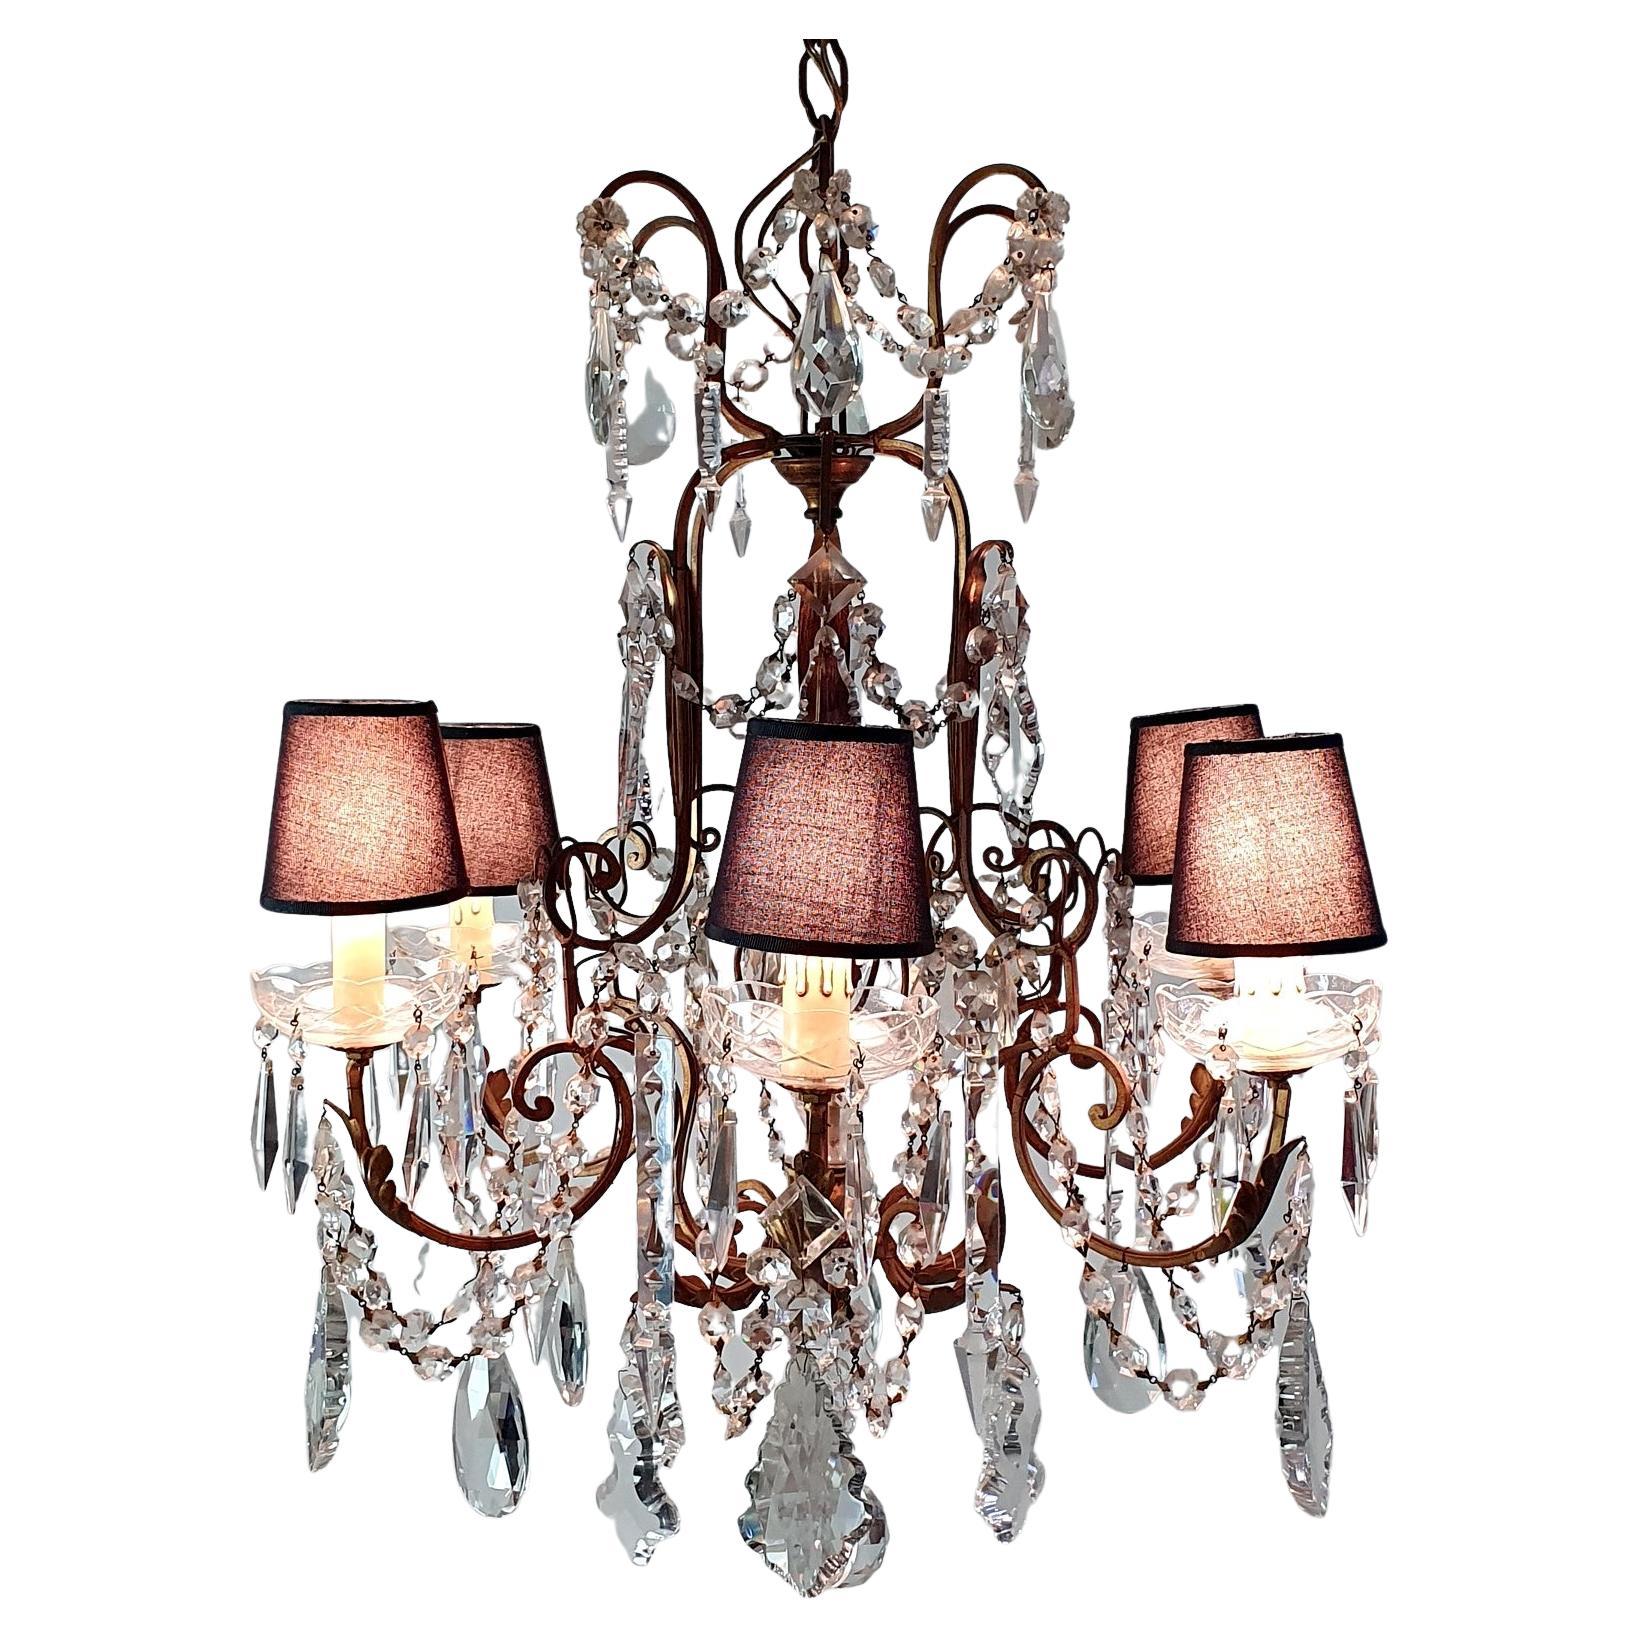 This is a Florentine rococo style chandelier hand made in Florence, Italy circa 1950 with an array of hand made crystals on a guilded iron frame. The chandelier has six candle shaped E14 lights which have been paired with black lampshades which